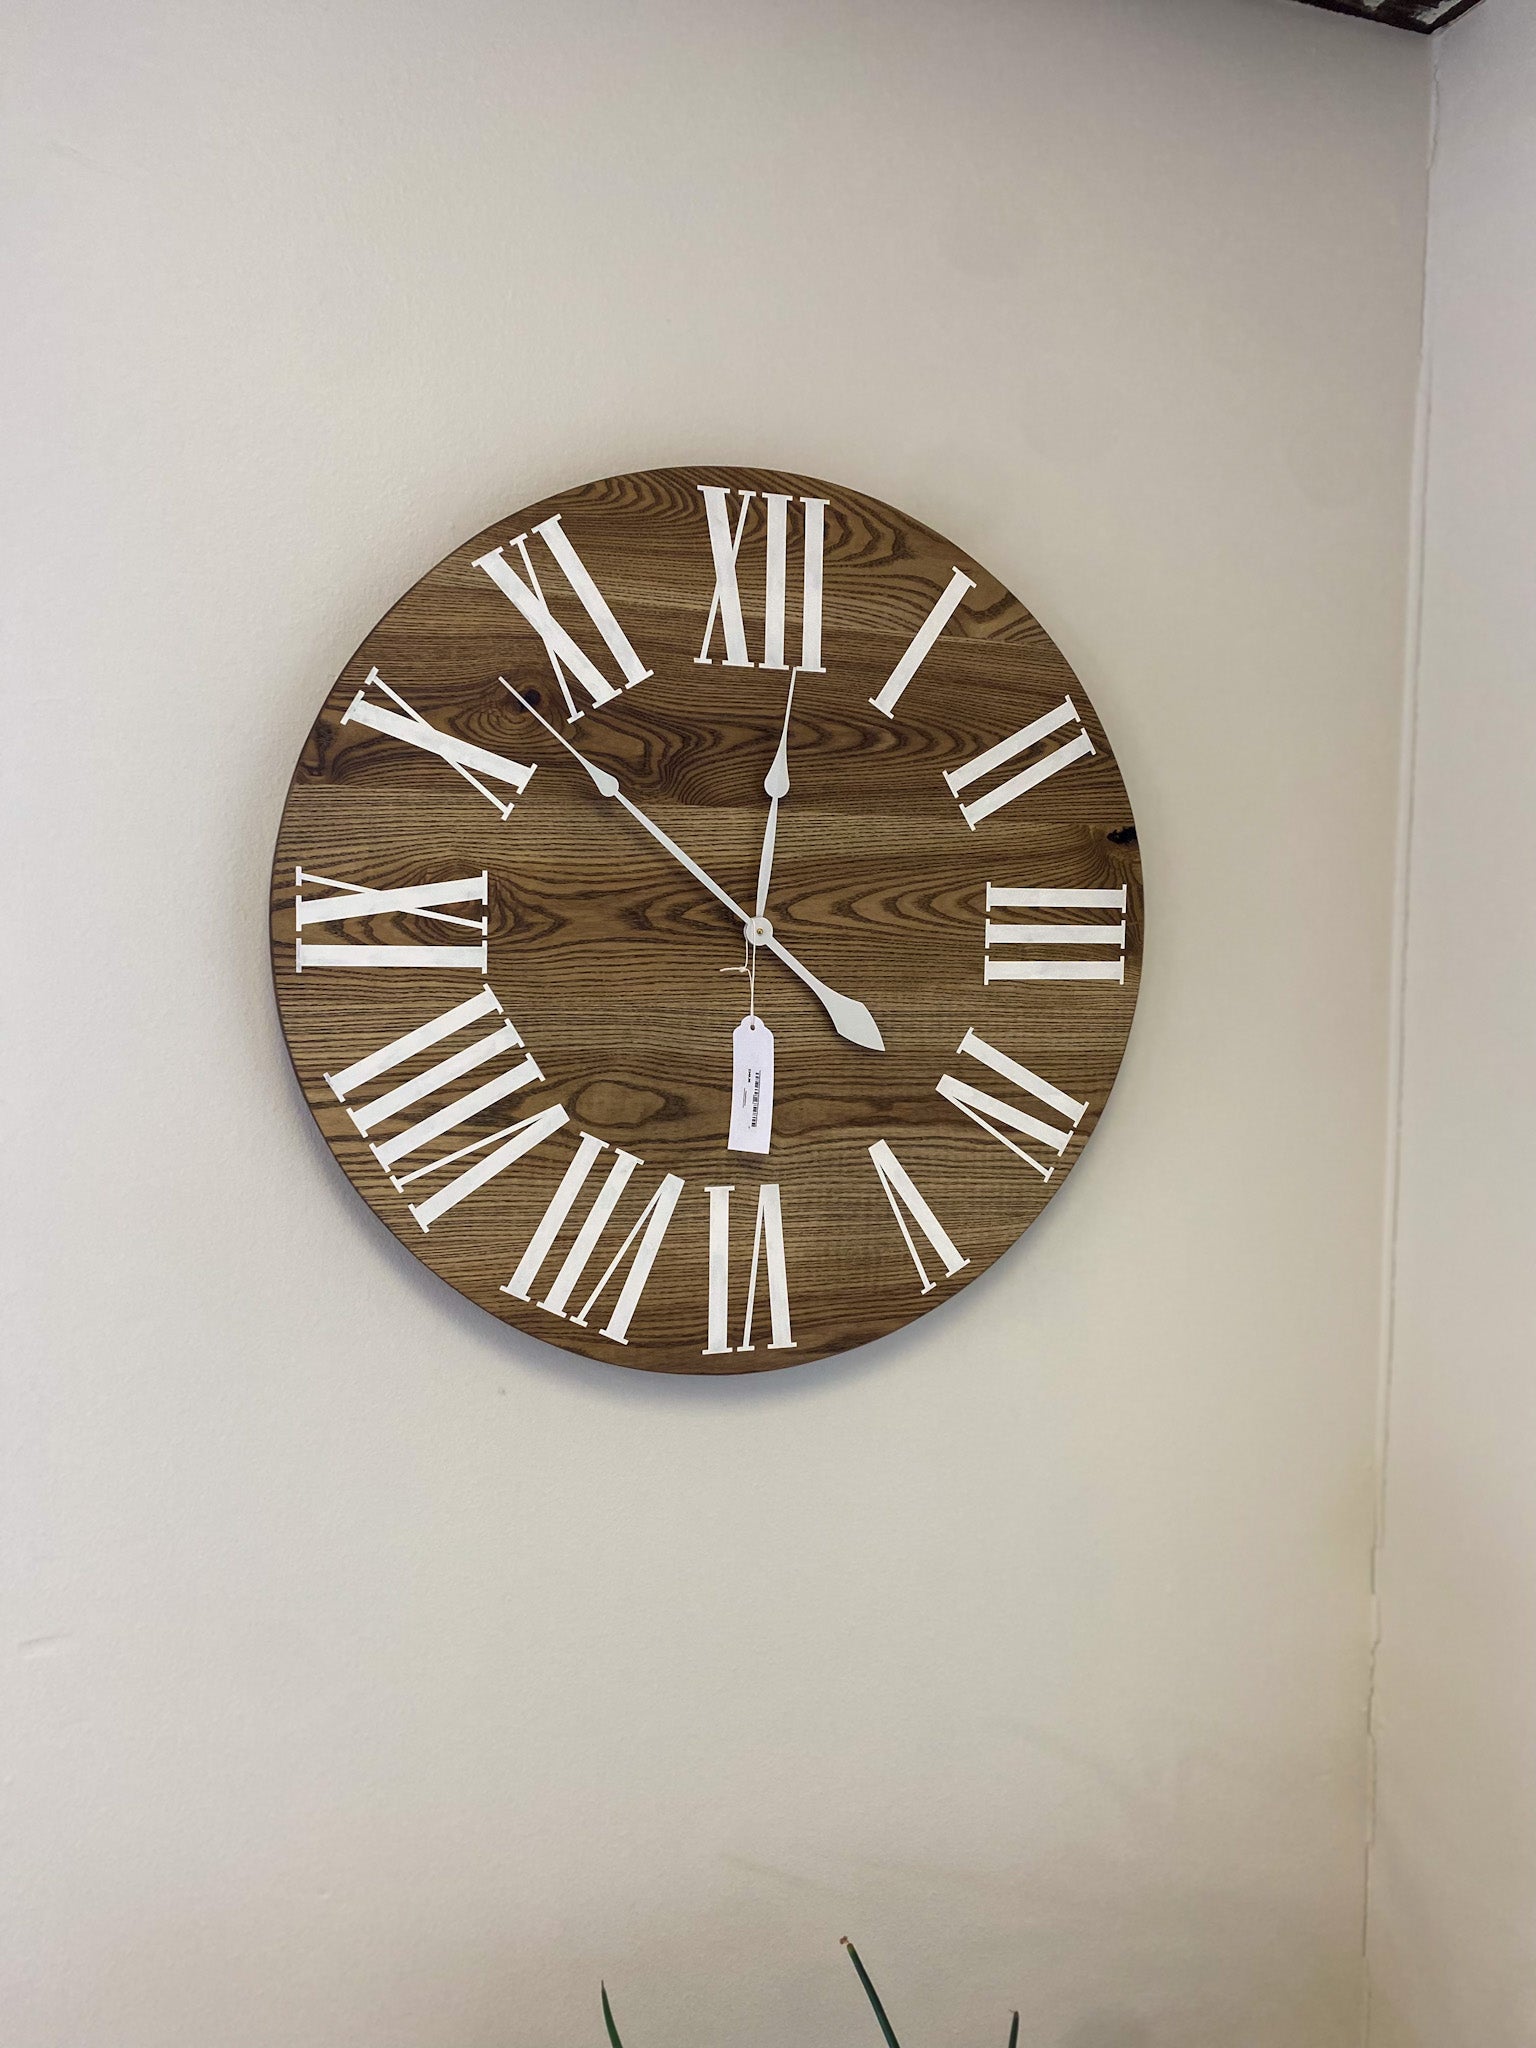 36" Dark Stained Solid Ash Wood Wall Clock with White Roman Numerals (in stock) - Hazel Oak Farms